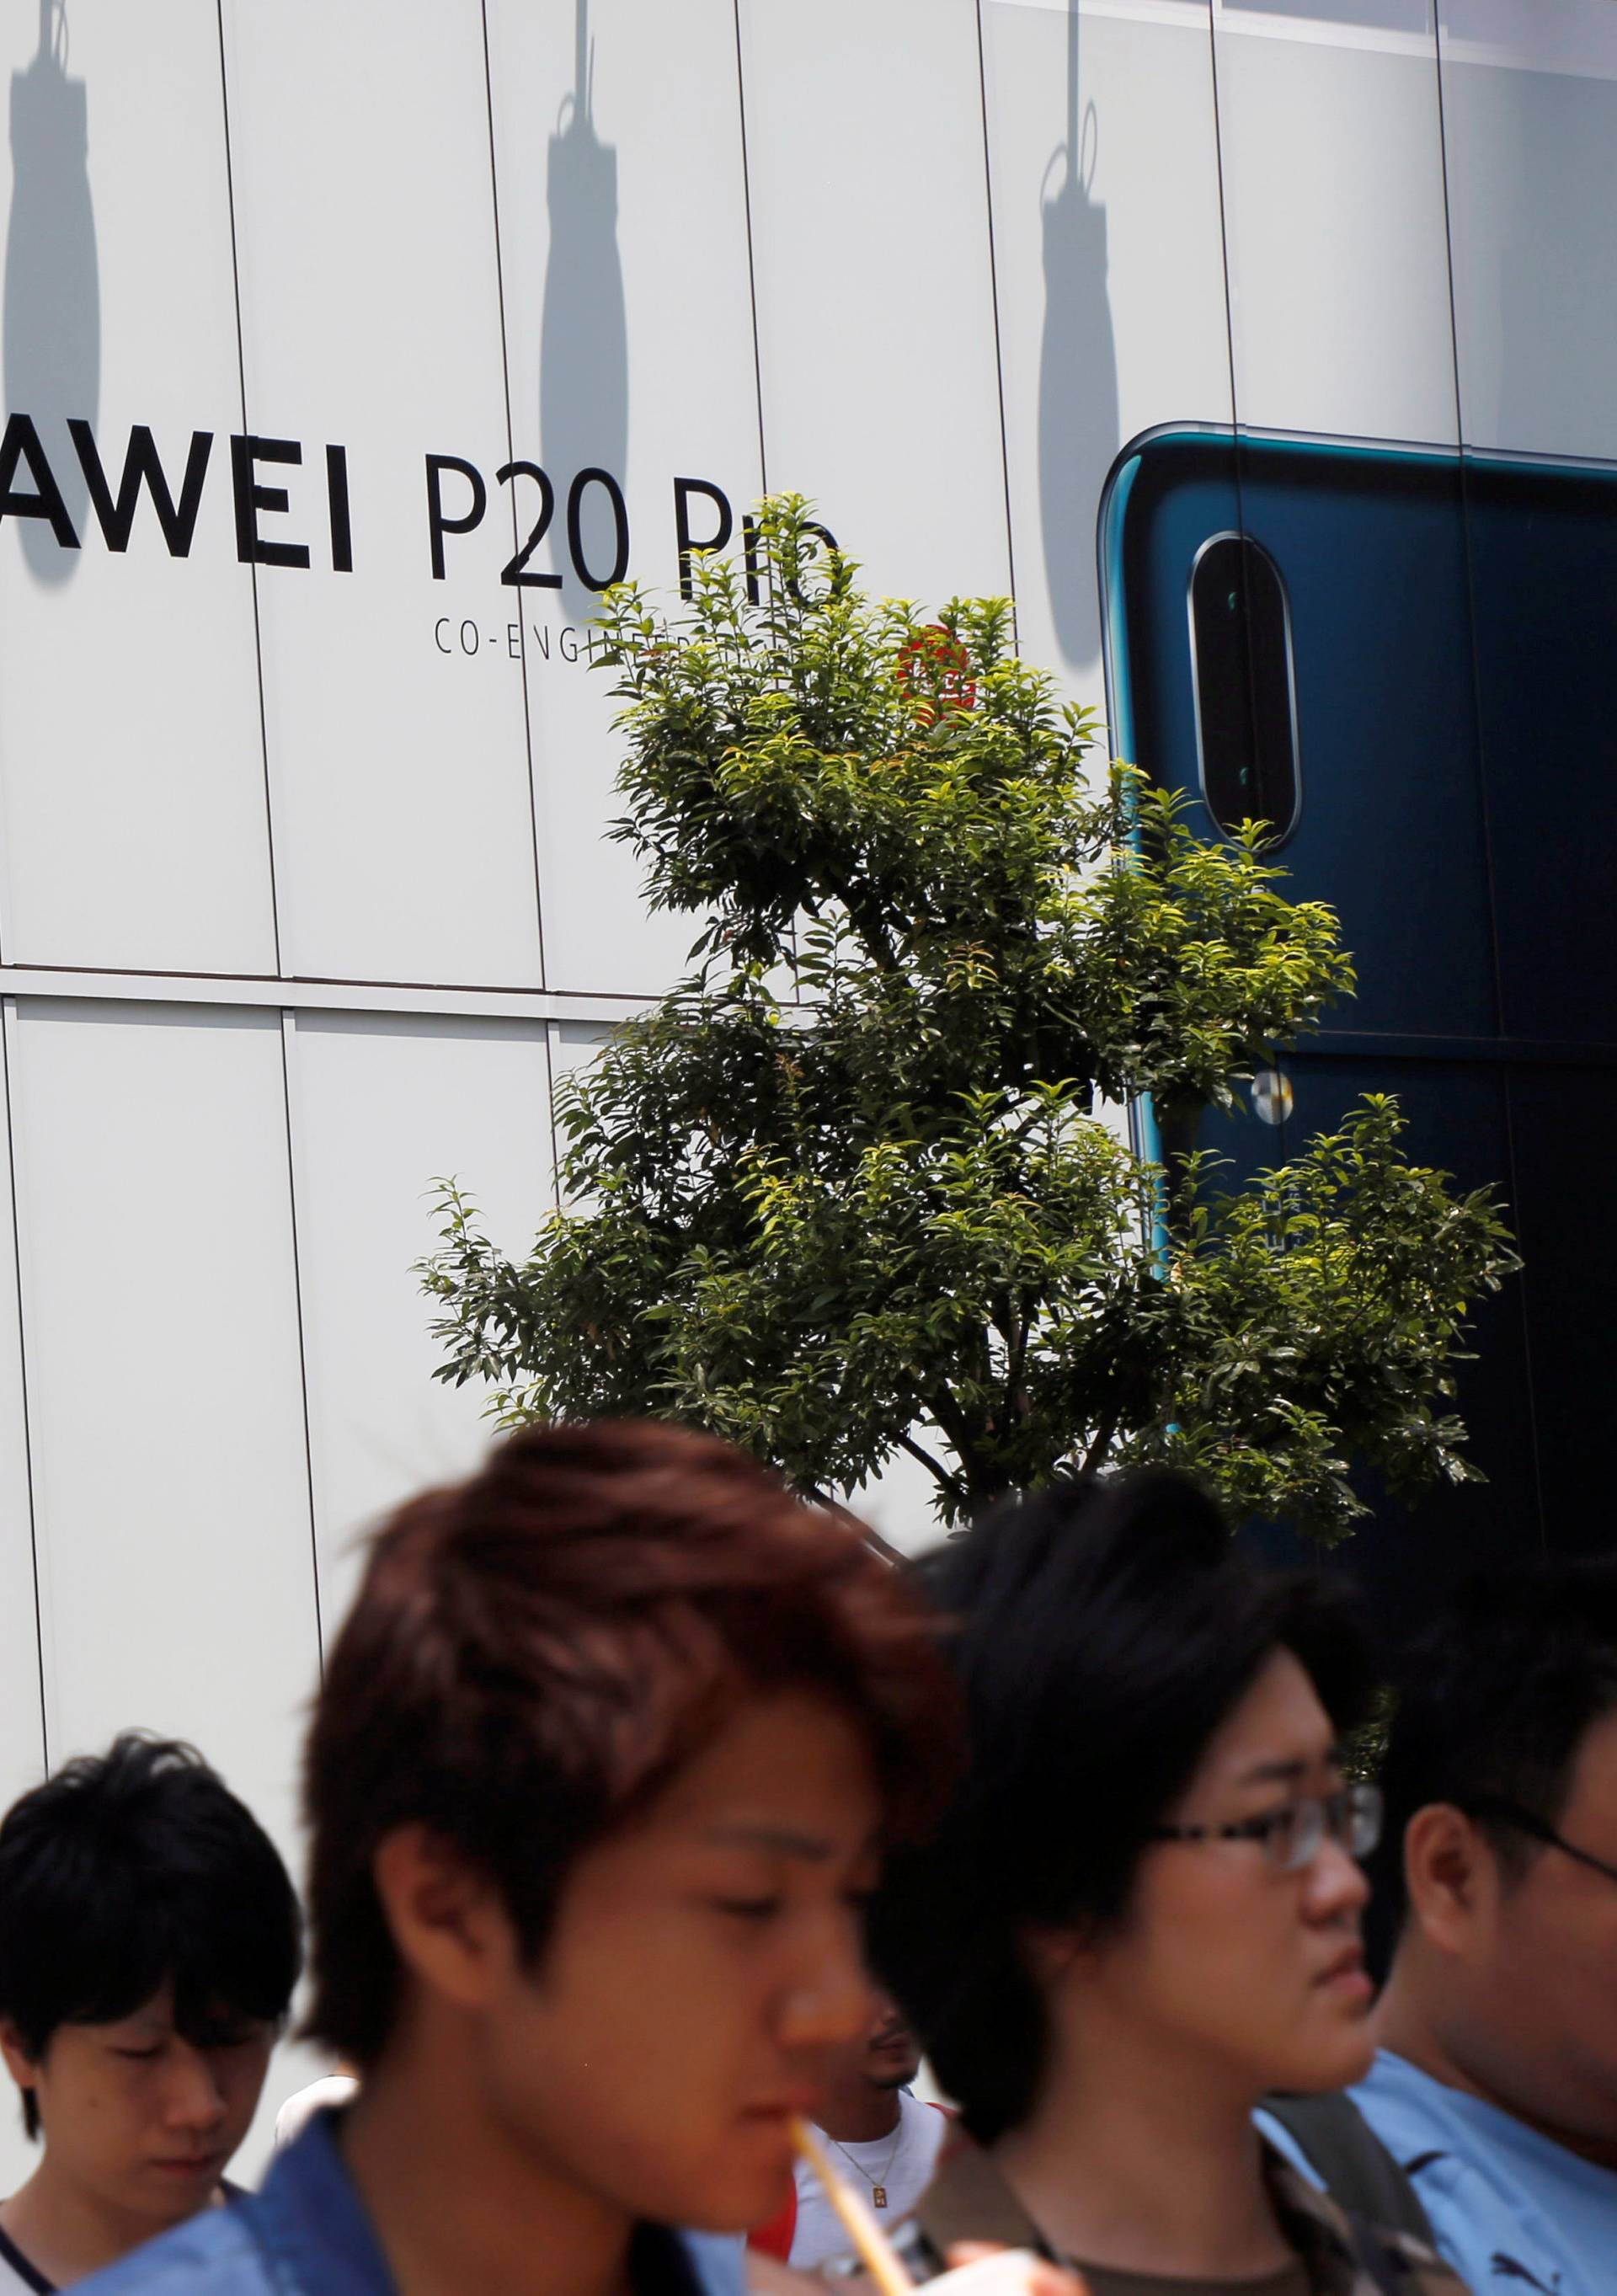 People walk past an advertisement for Huawei outside an electronic store in Tokyo